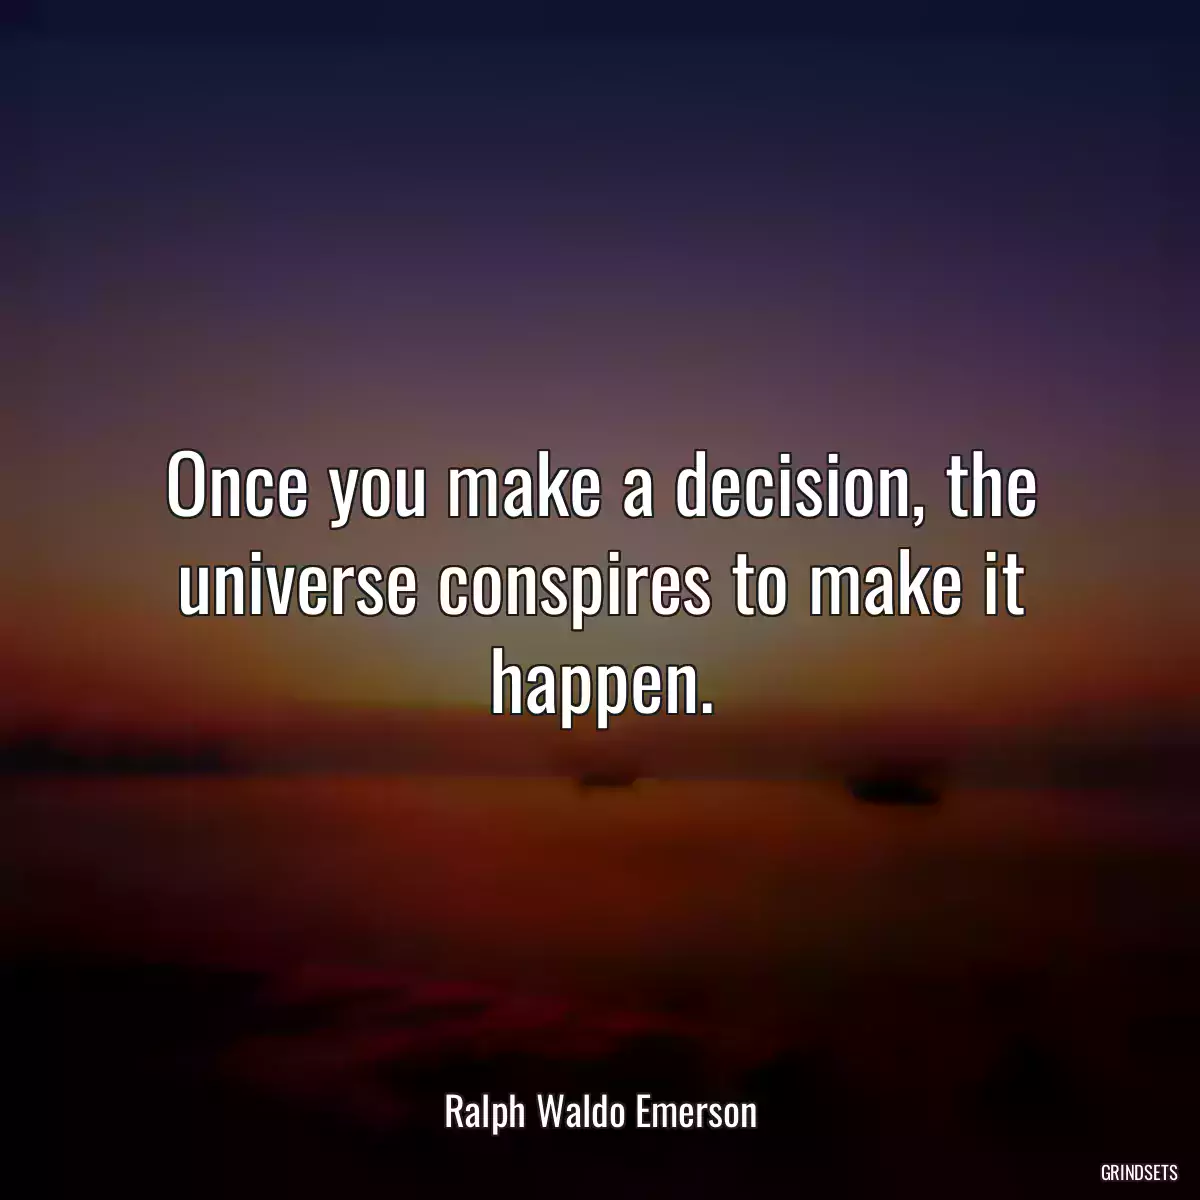 Once you make a decision, the universe conspires to make it happen.